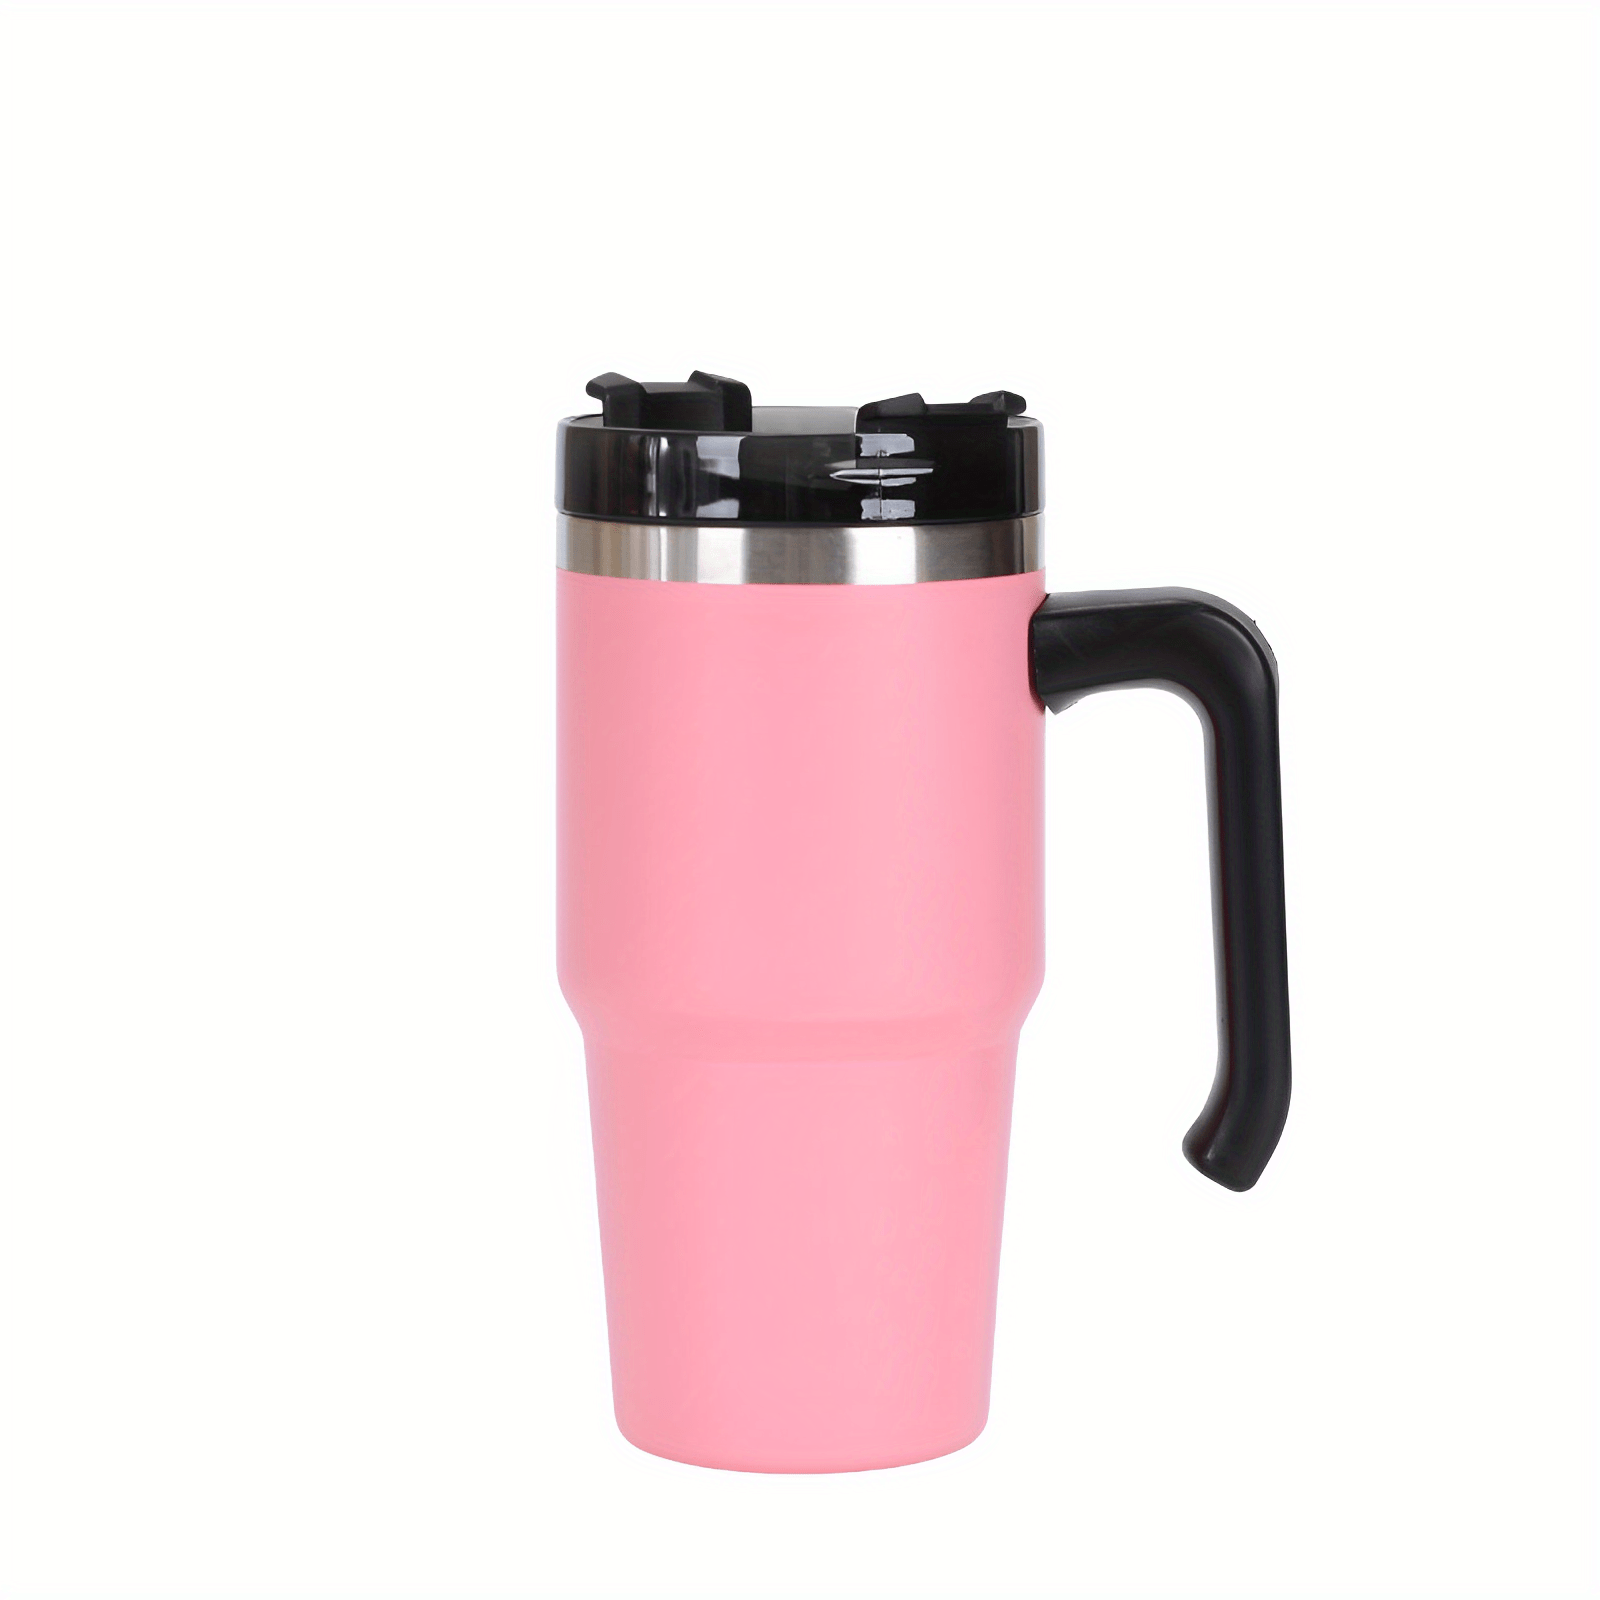 30oz Stainless Steel 20 Oz Thermos Bottle For Water, Coffee, And